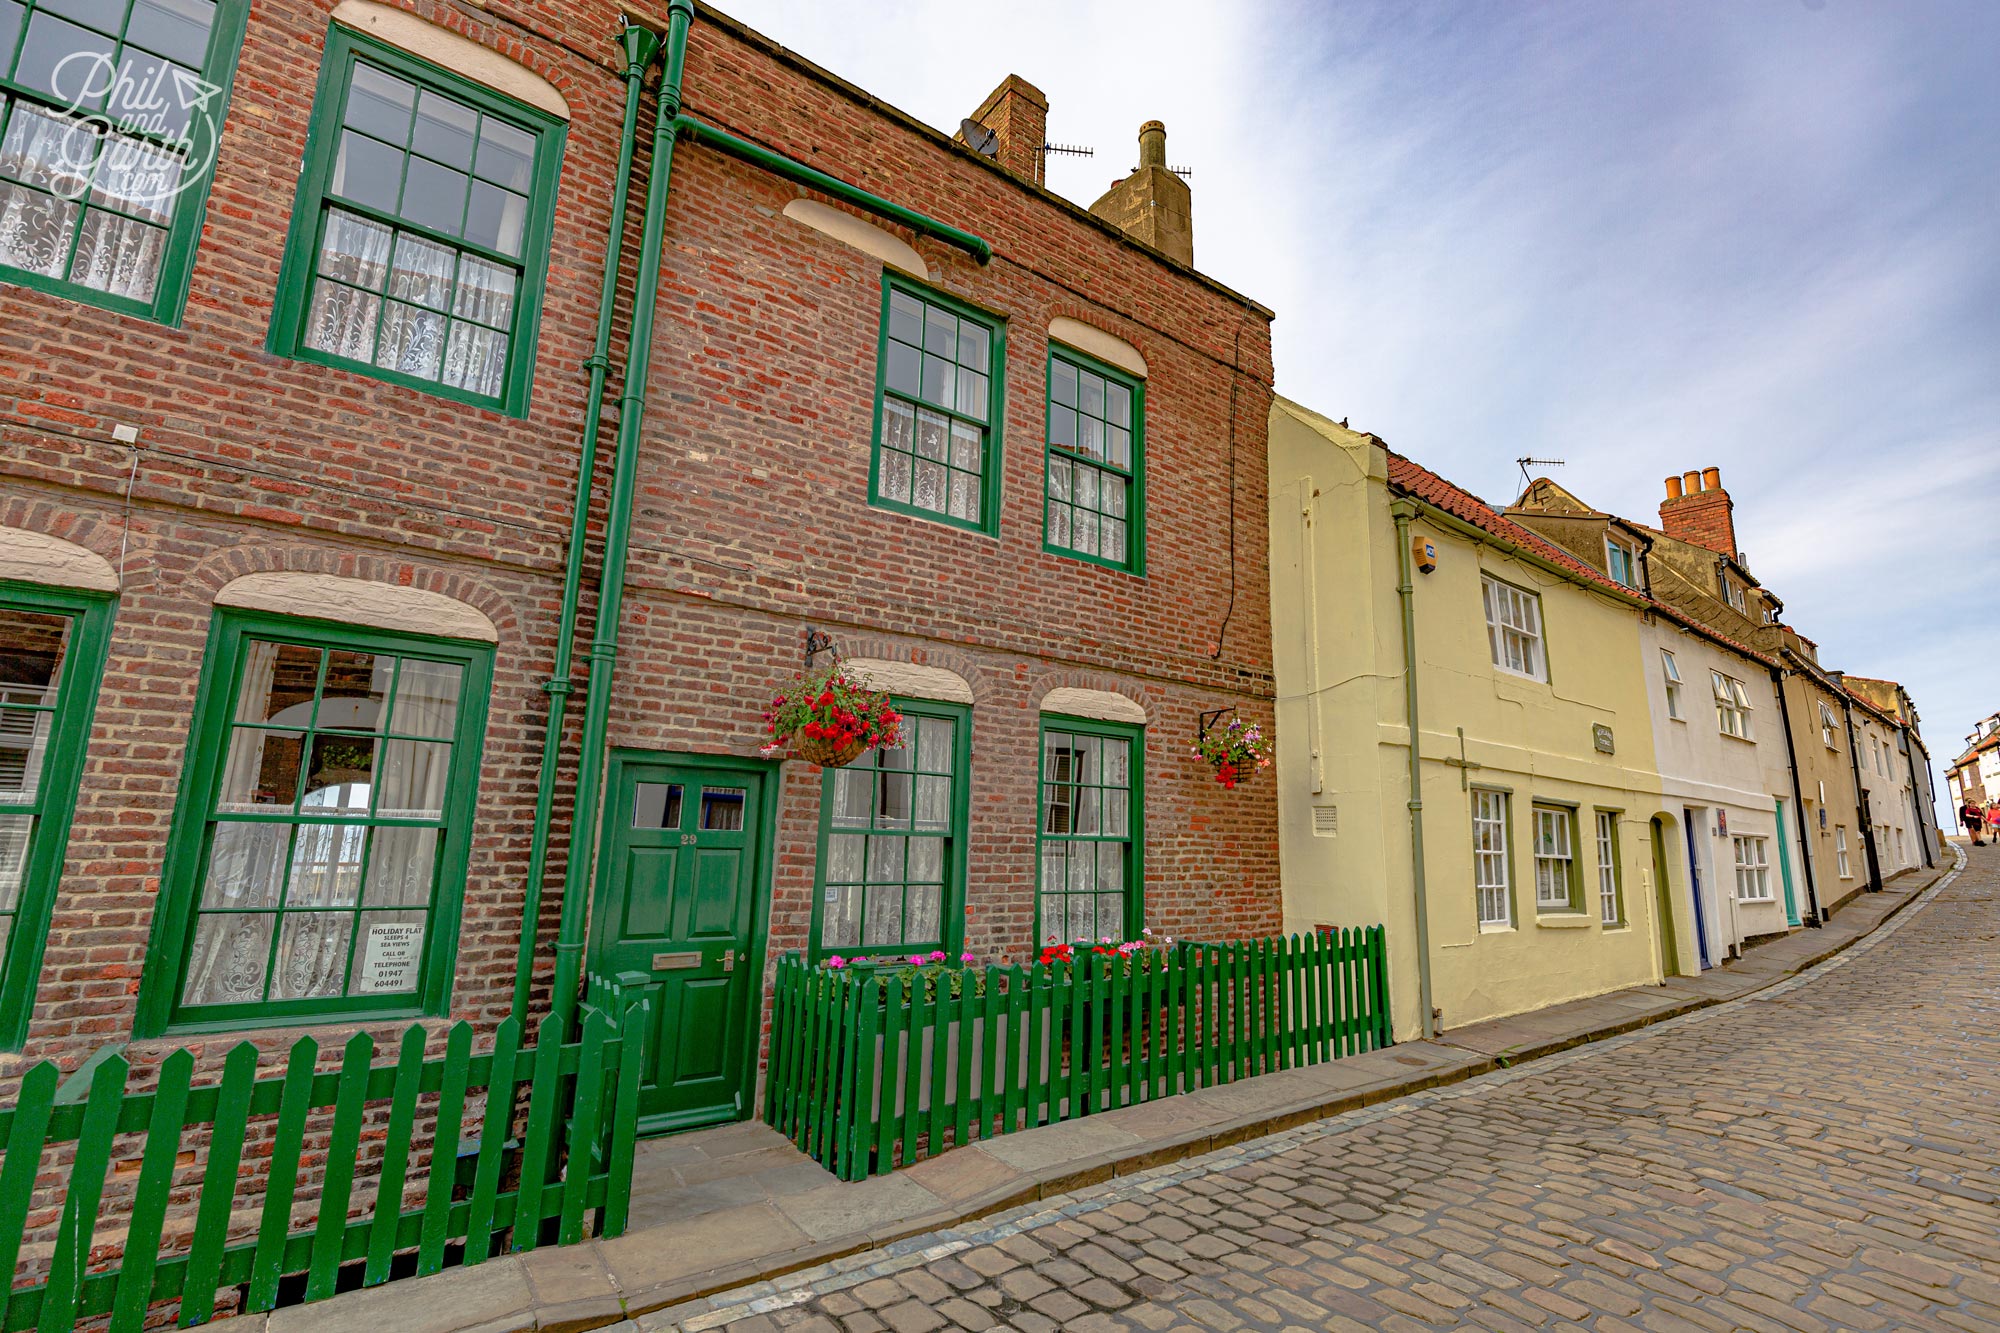 The pretty cobbled lanes in Whitby’s old town centre